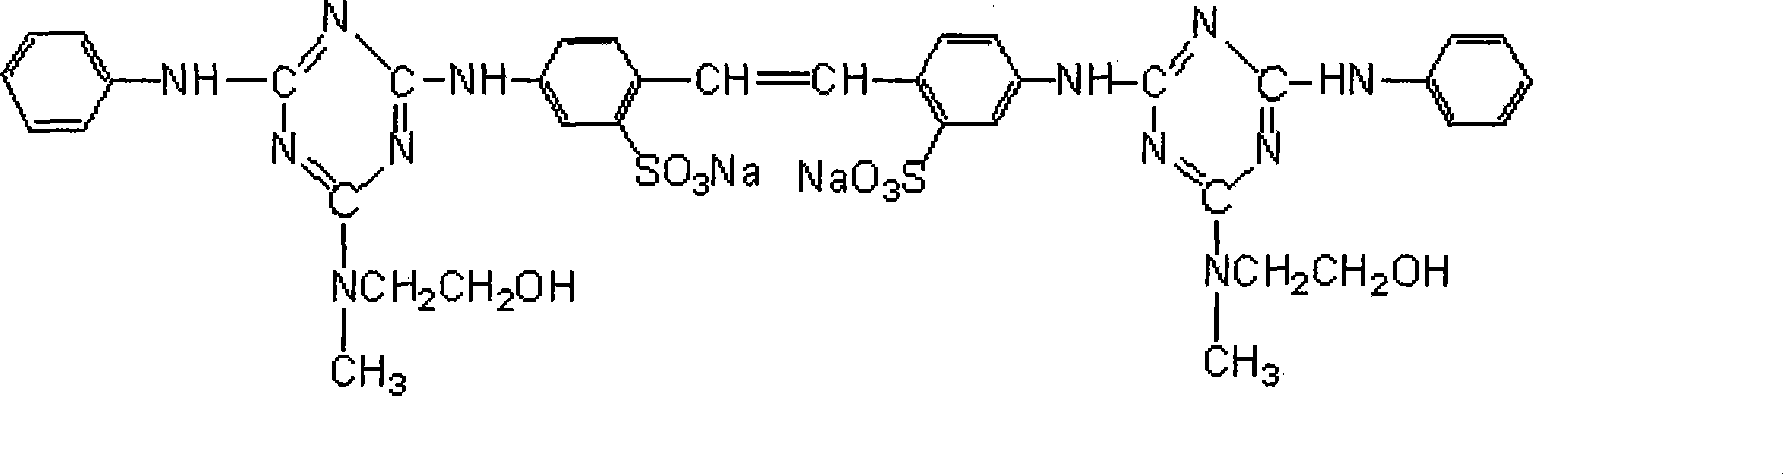 Process for producing fluorescent whitening agent 5BM